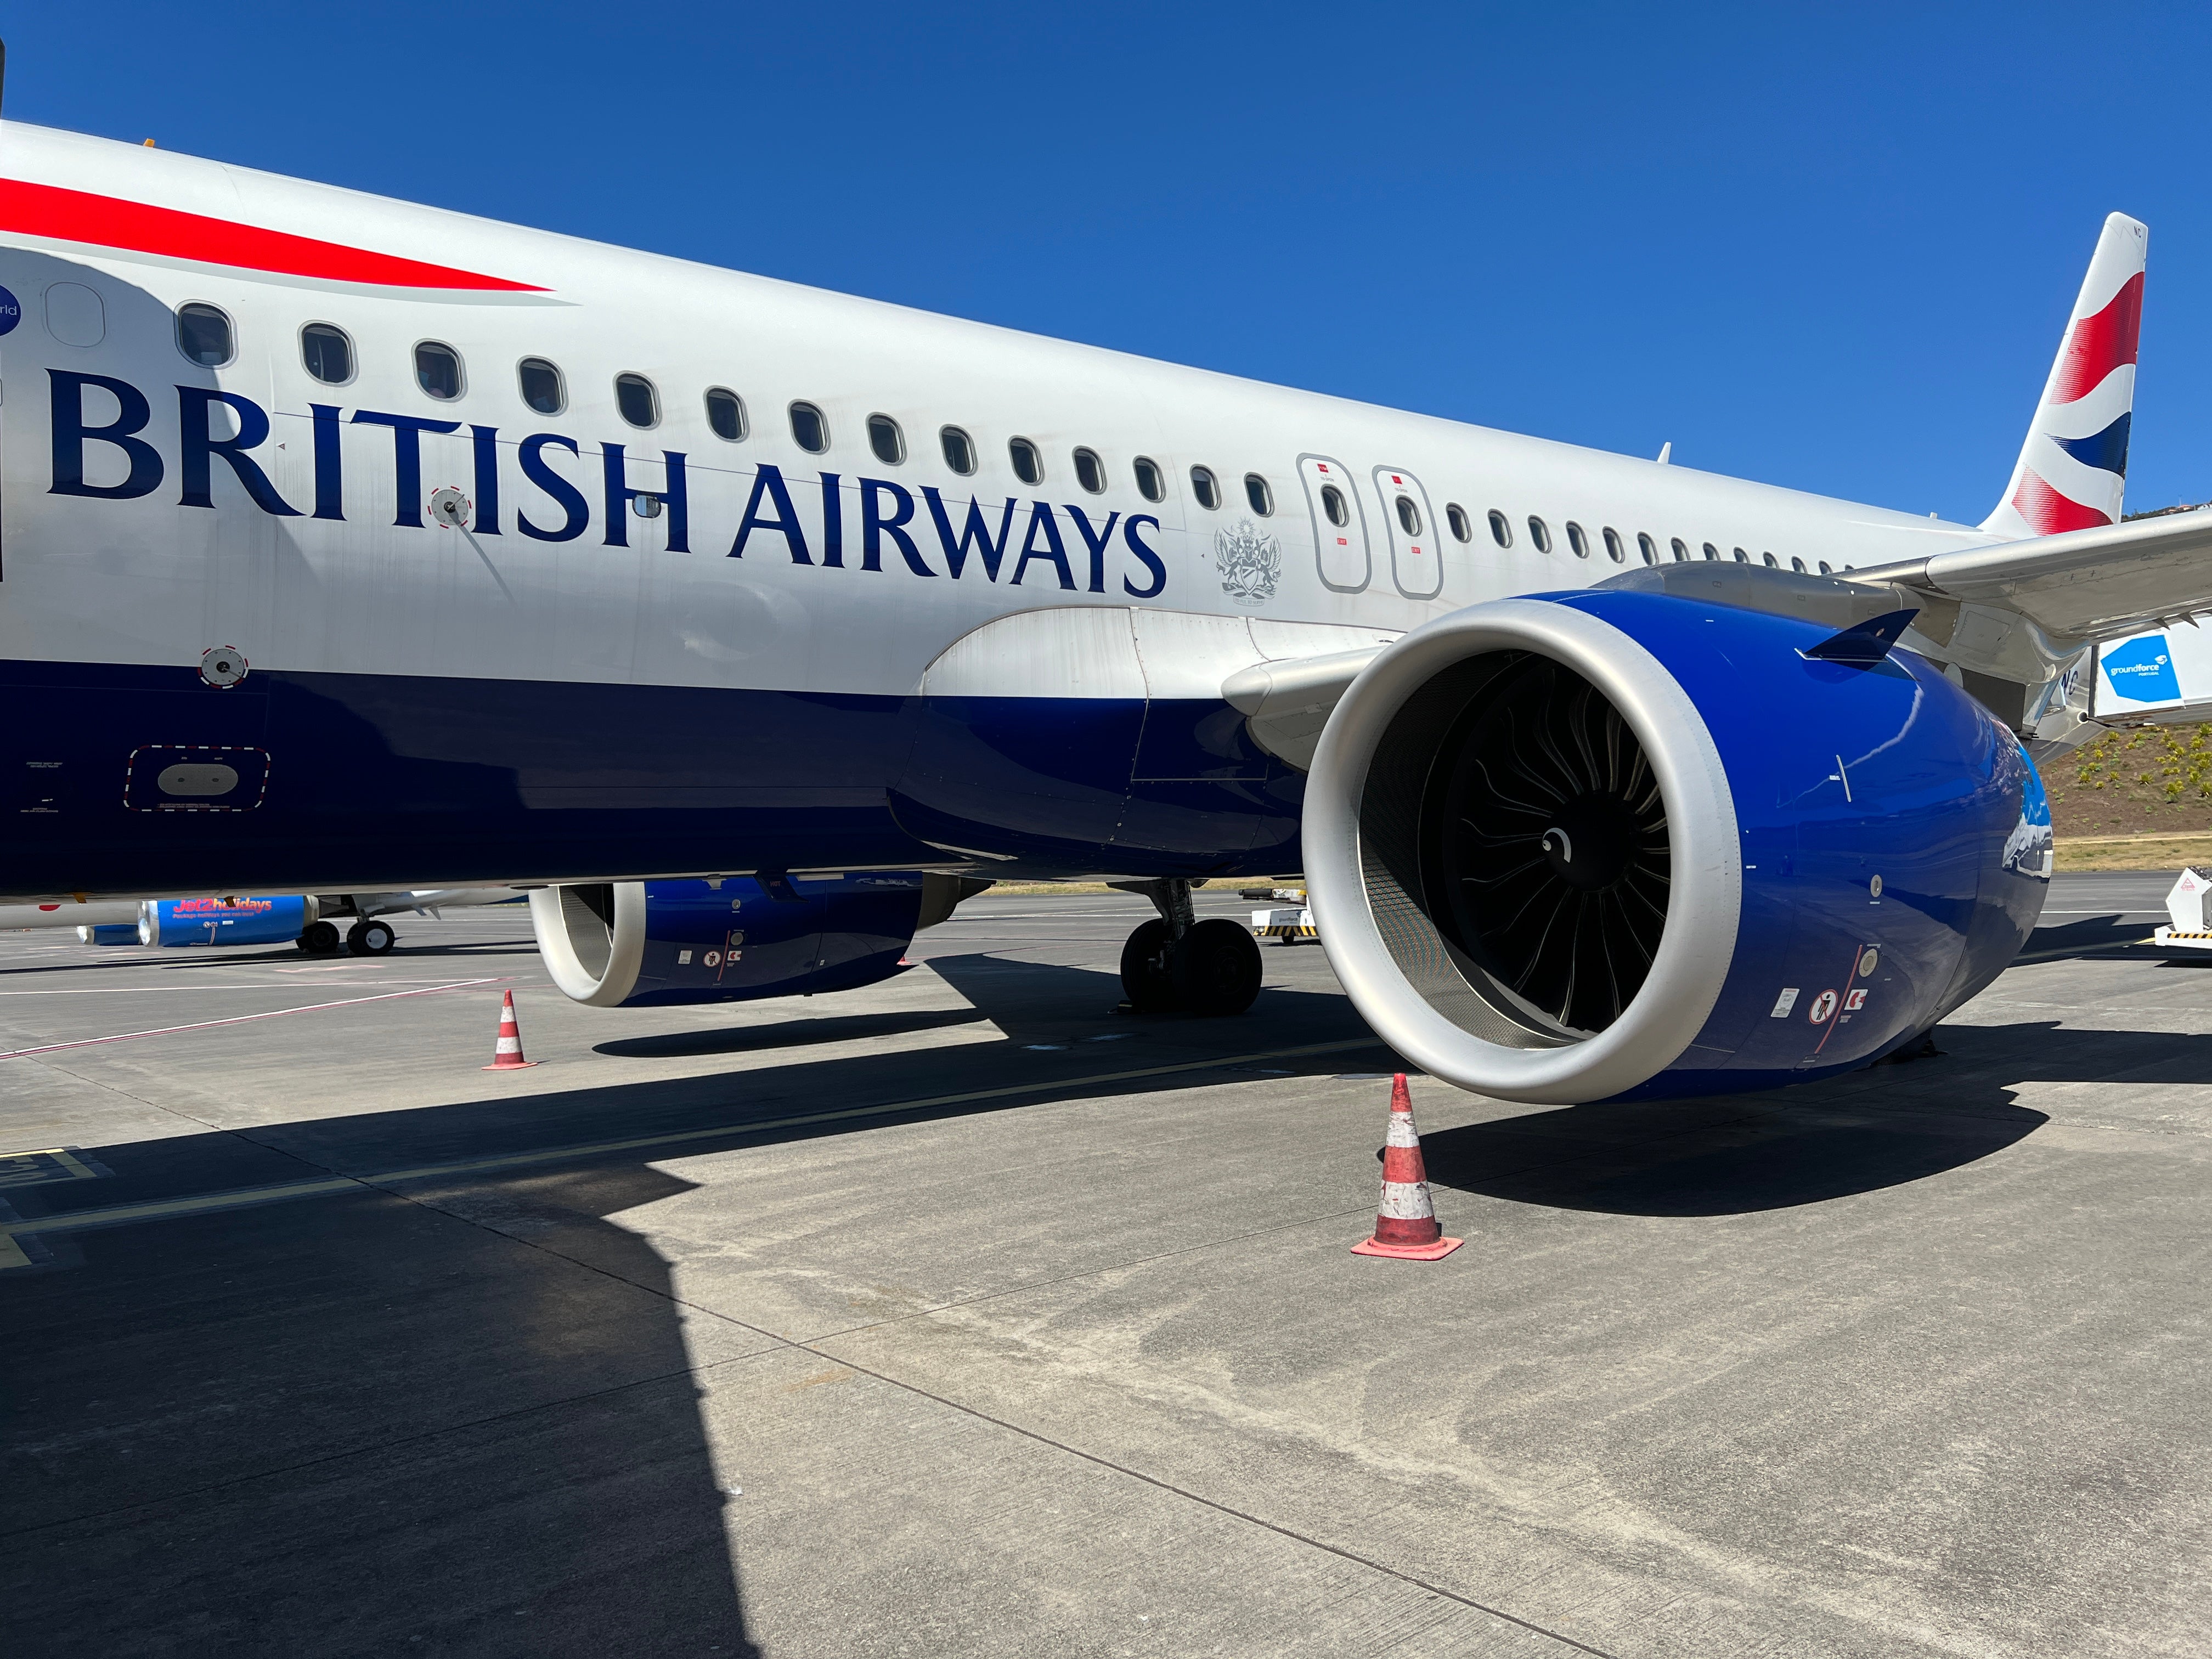 On schedule: a British Airways Airbus A320 at Funchal airport in Madeira, Portugal